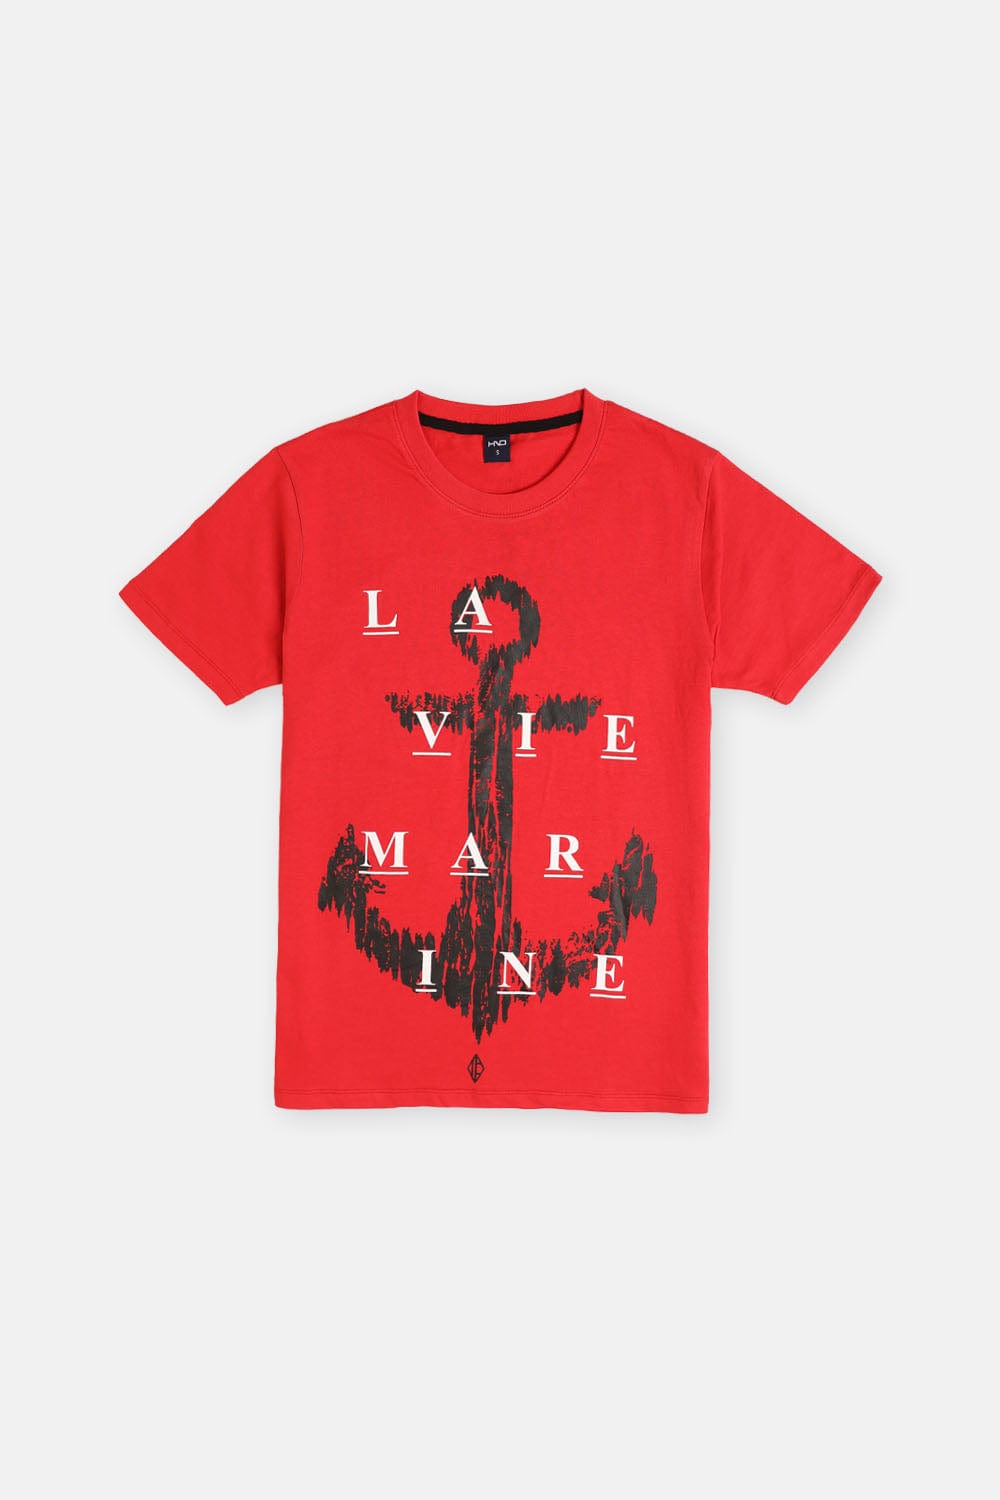 Hope Not Out by Shahid Afridi Men T-Shirt Men Red Lavie Marine T-Shirt